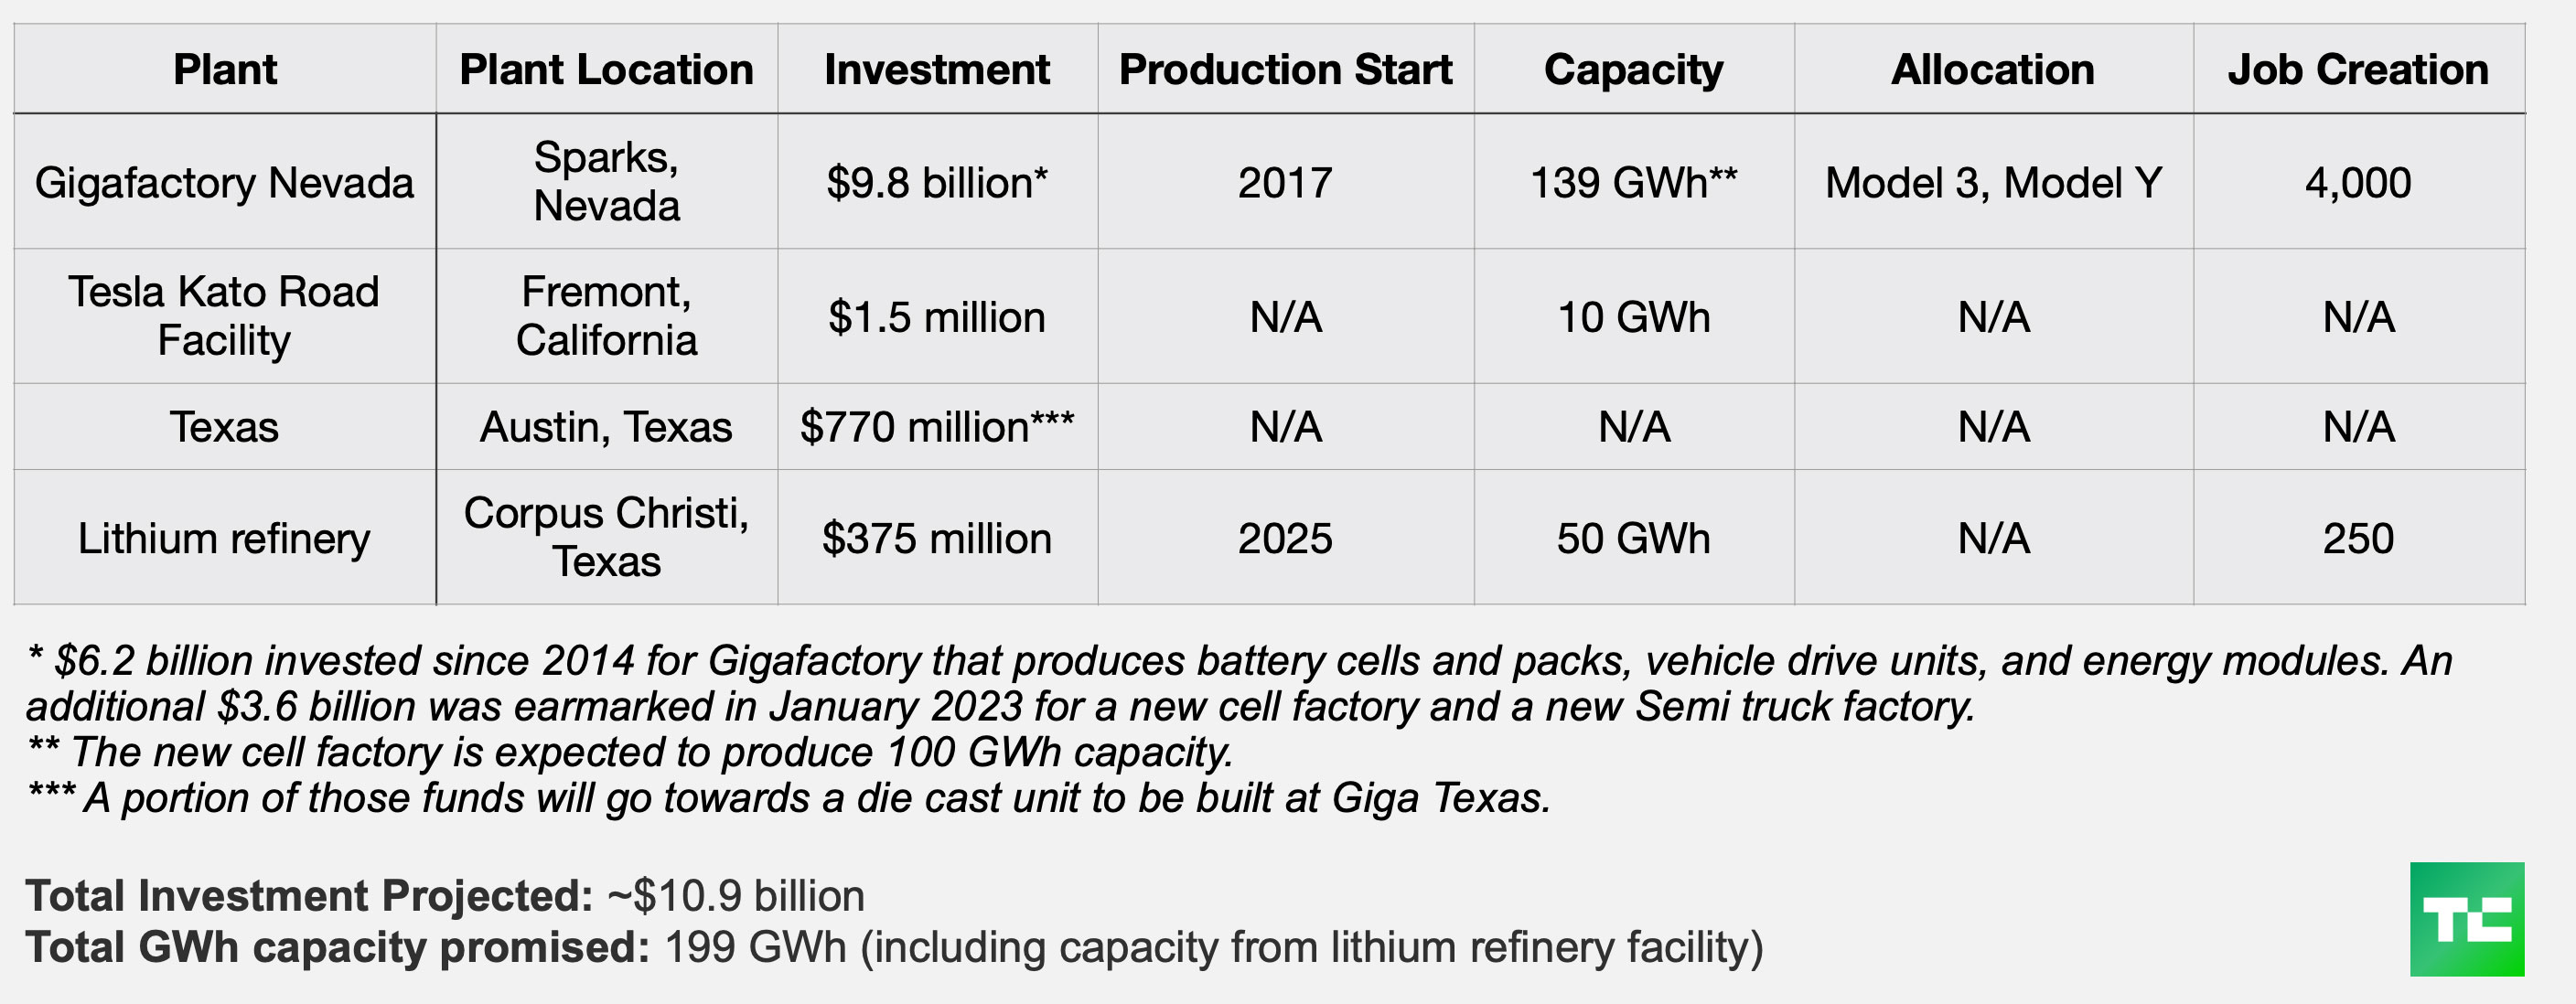 Tesla's battery plant production plans broken down by plant name, plant location, investment, production start, capacity, allocation and the number of jobs it will create. Tesla's total investment projected to be about $10.9 billion. Total GWh capacity promised is 199 GWh. 